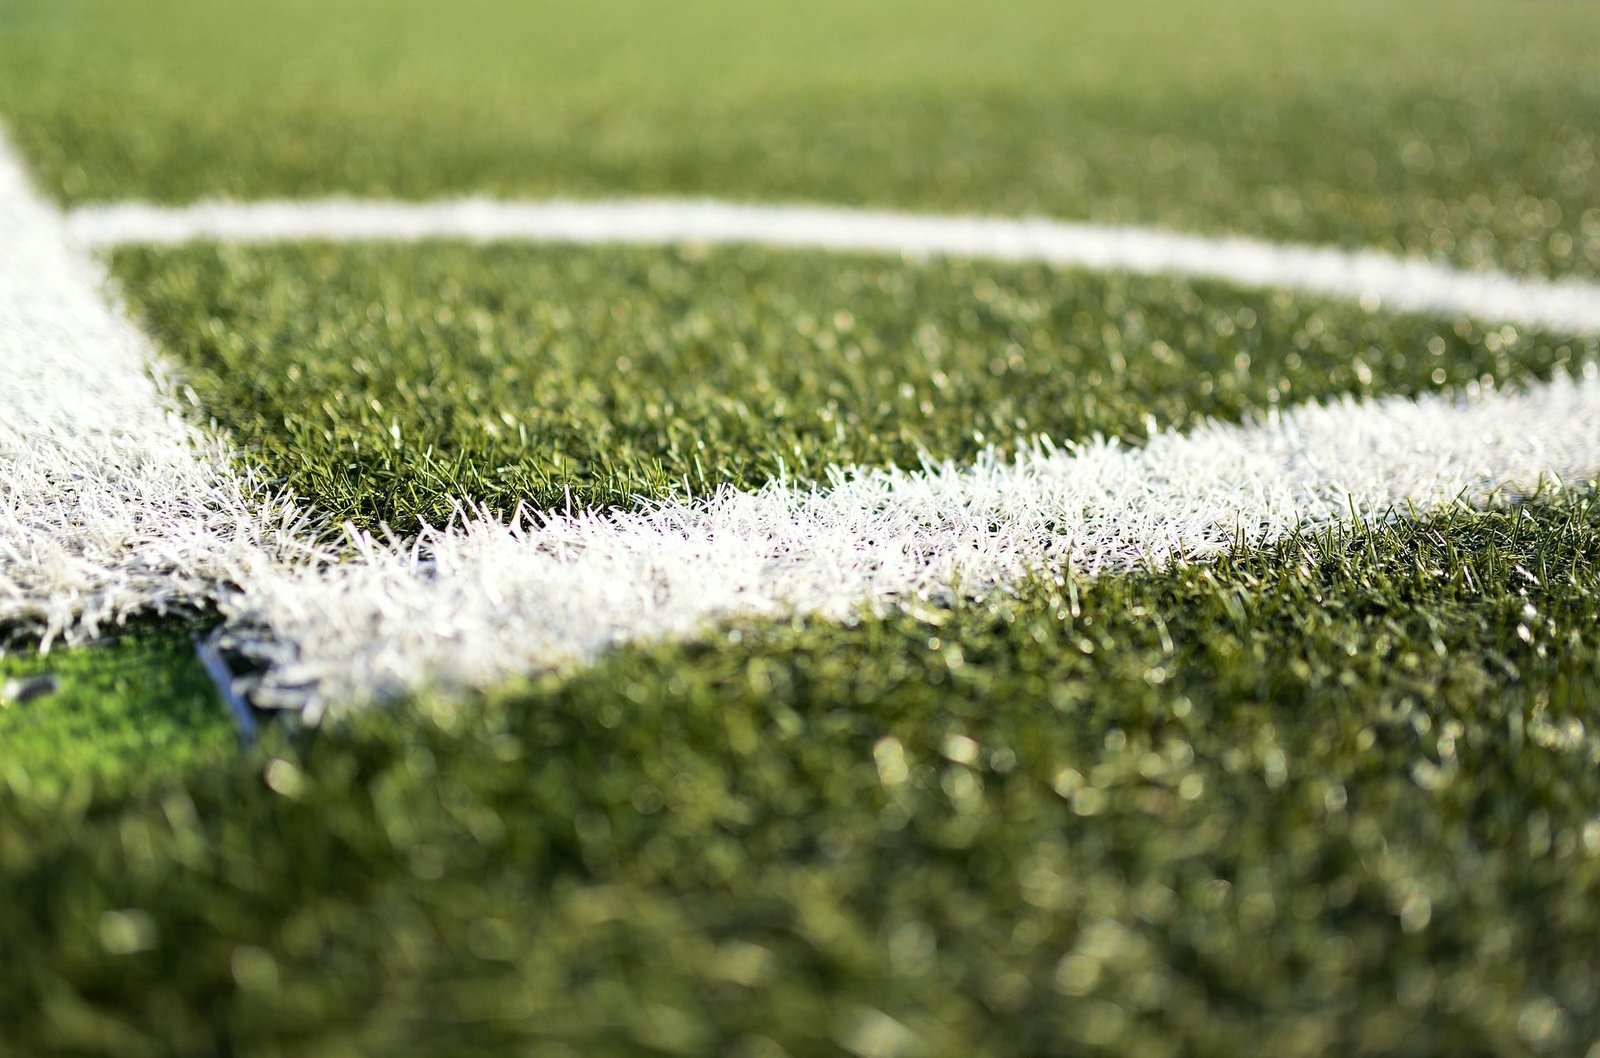 Close-up image of a green artificial turf field installed by Tampa Turf Solutions with a white painted line, capturing the texture of the grass and the distinct contrast between the green surface and the marking. The shadows and lighting suggest a sunny day in Tampa, FL.